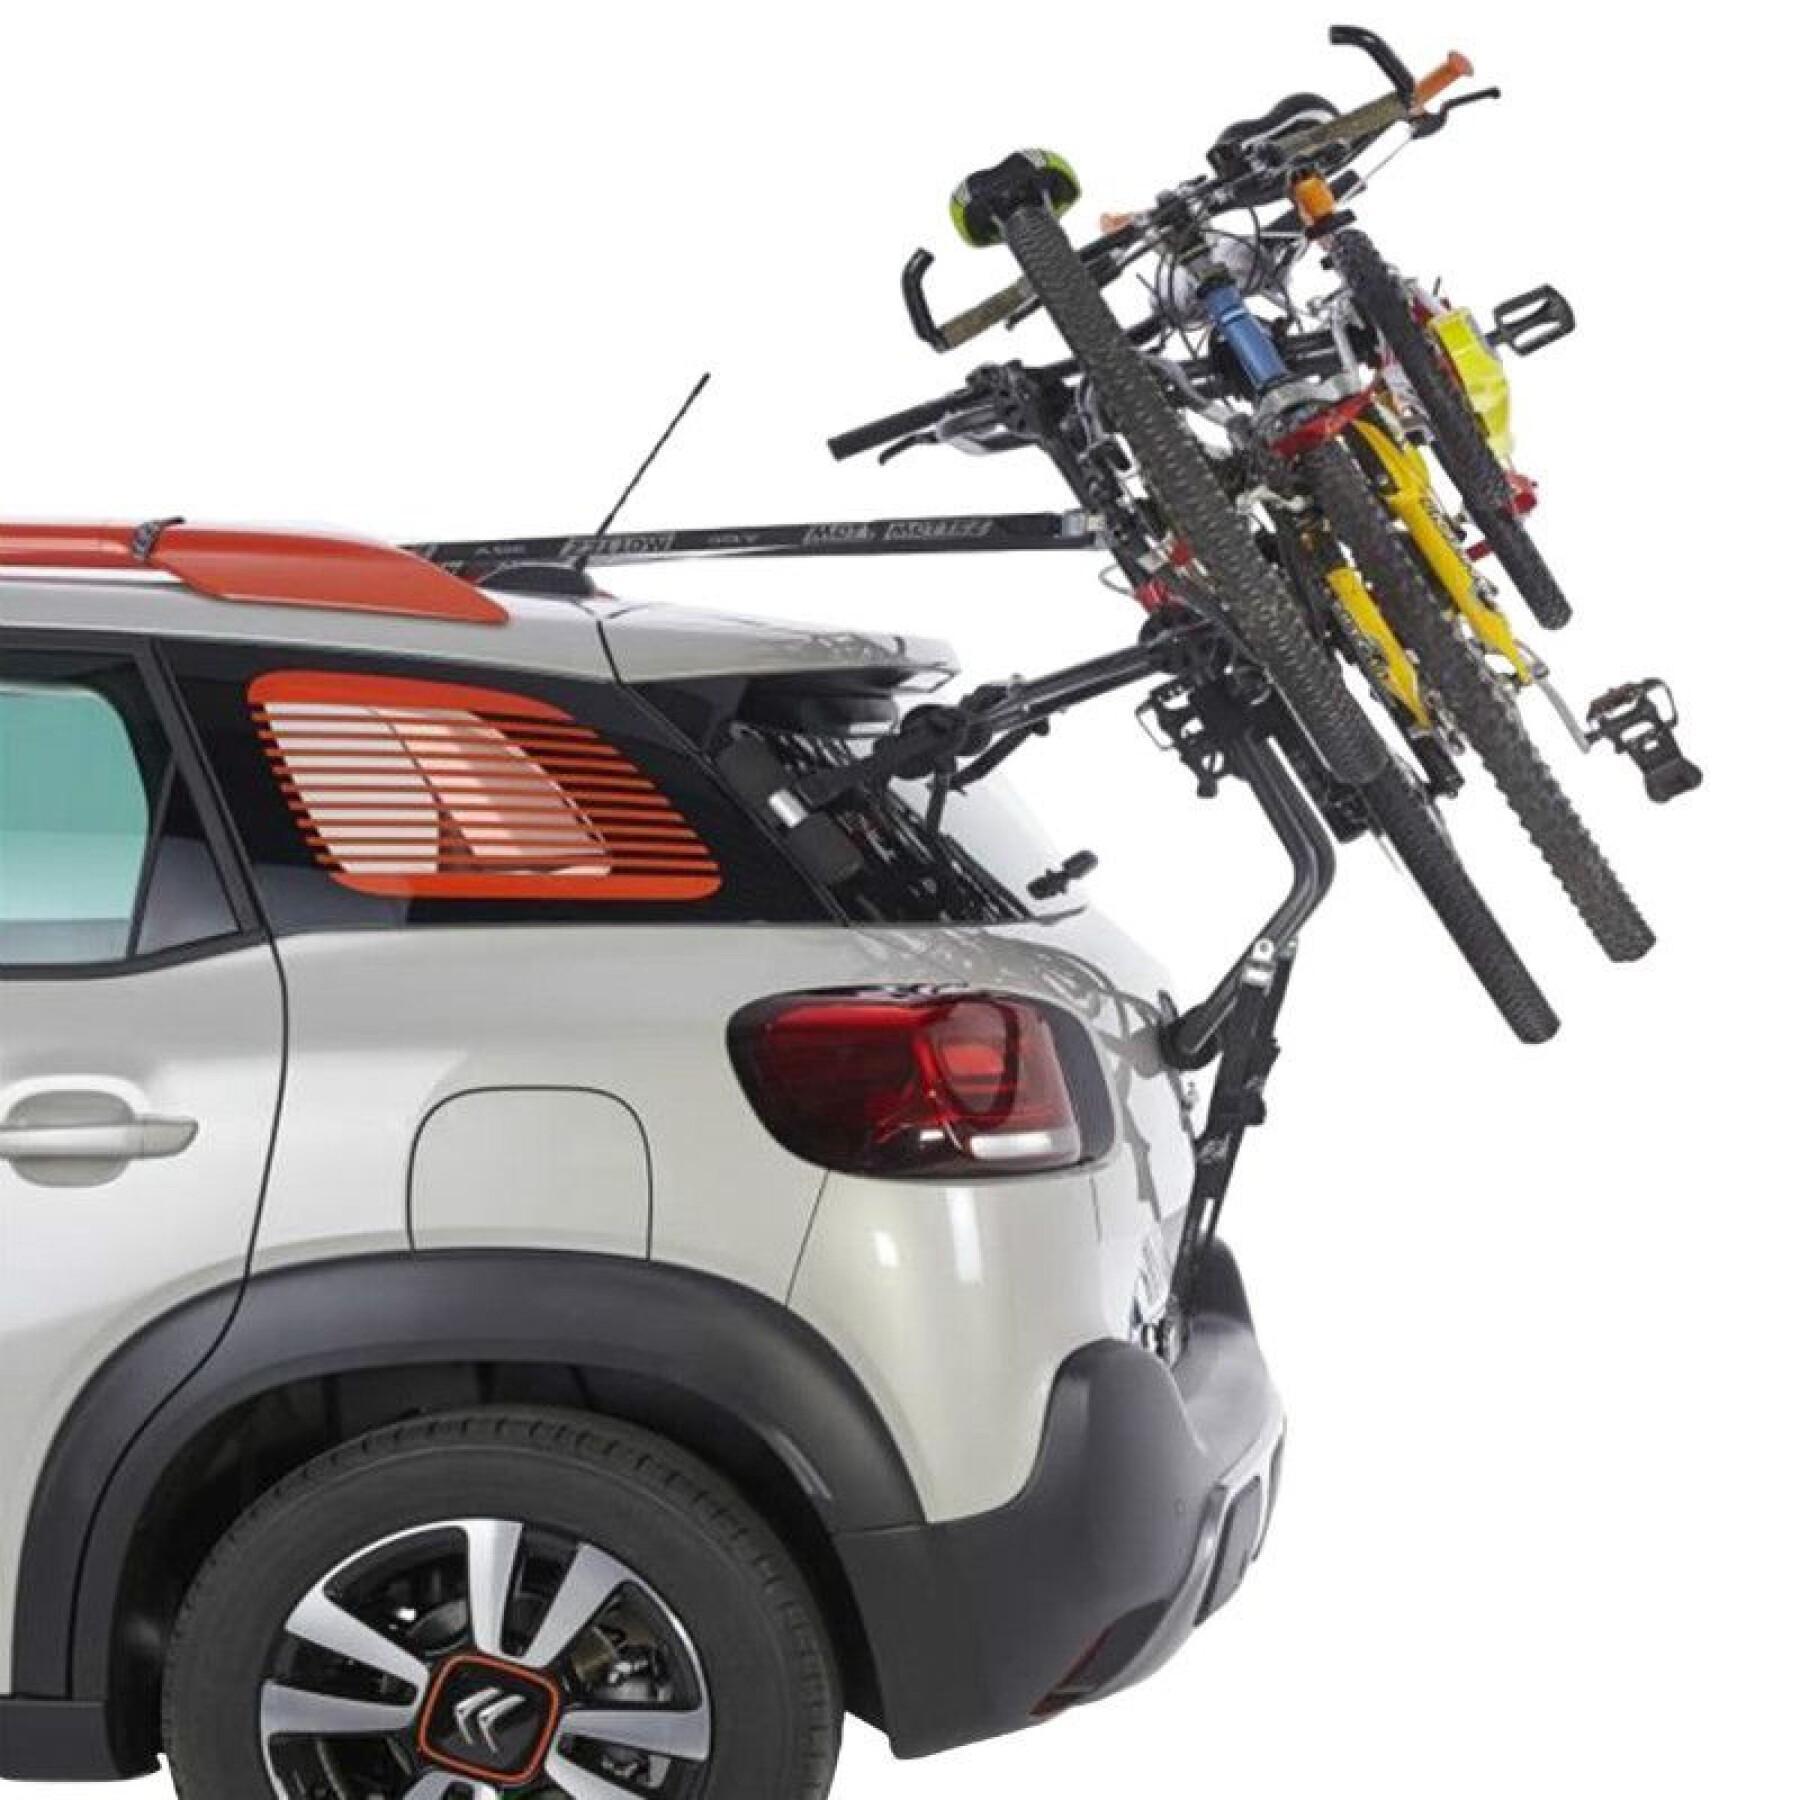 Bike carrier for 3 bikes with anti-theft device - compatible on 320 recent vehicles Mottez shiva-2 Homologue